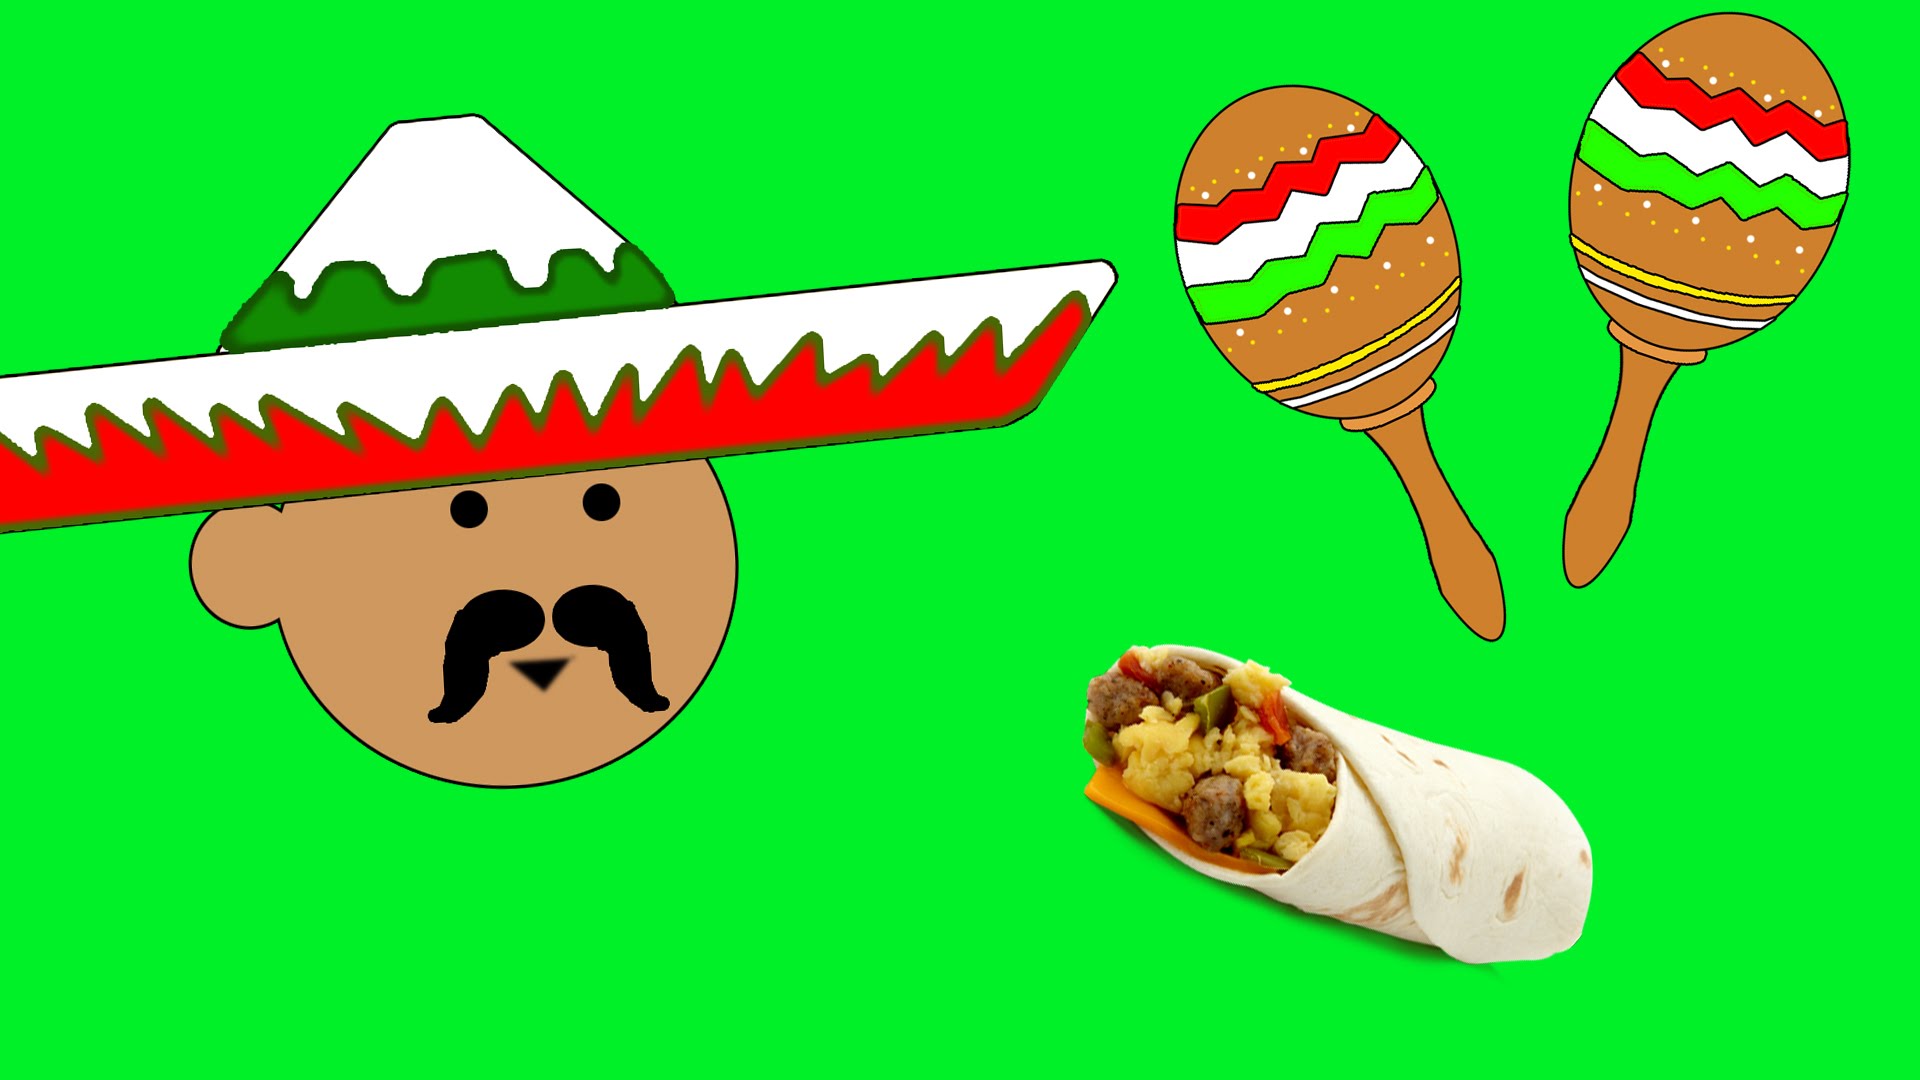 The Mexican Backgrounds, Compatible - PC, Mobile, Gadgets| 1920x1080 px